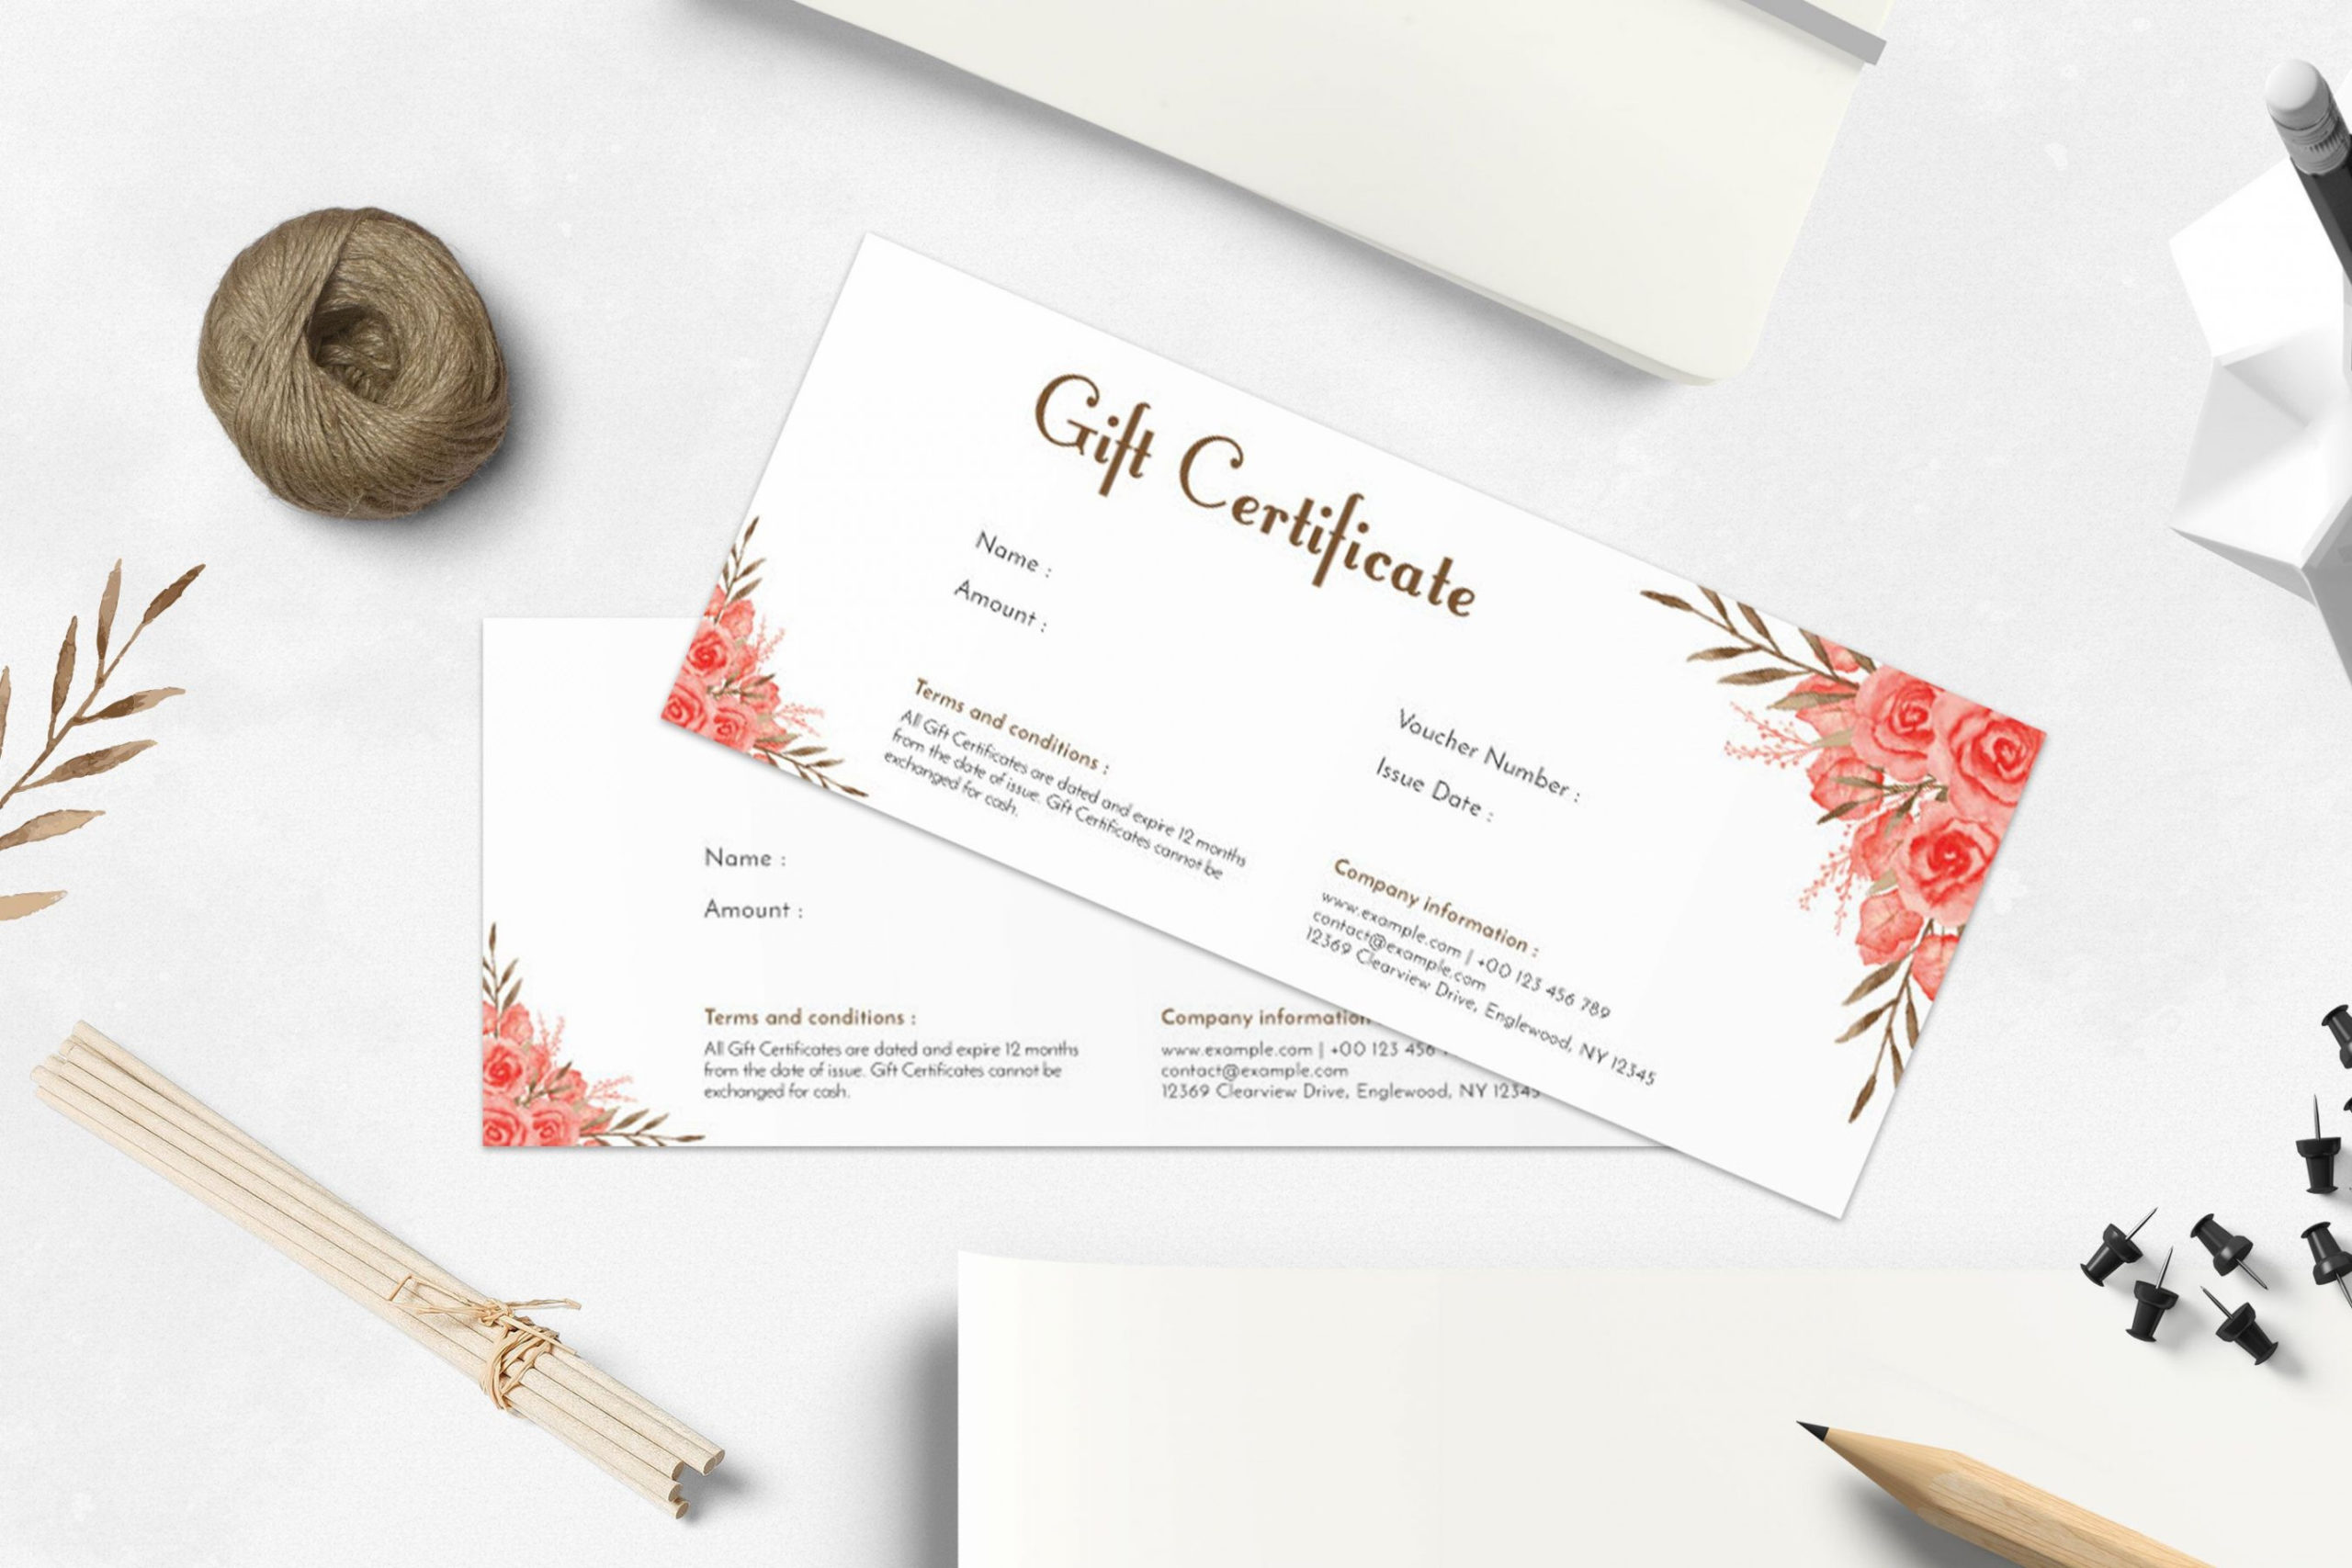 Printable Gifts Certificate Templates Clean And Elegant with regard to Printable Elegant Gift Certificate Template